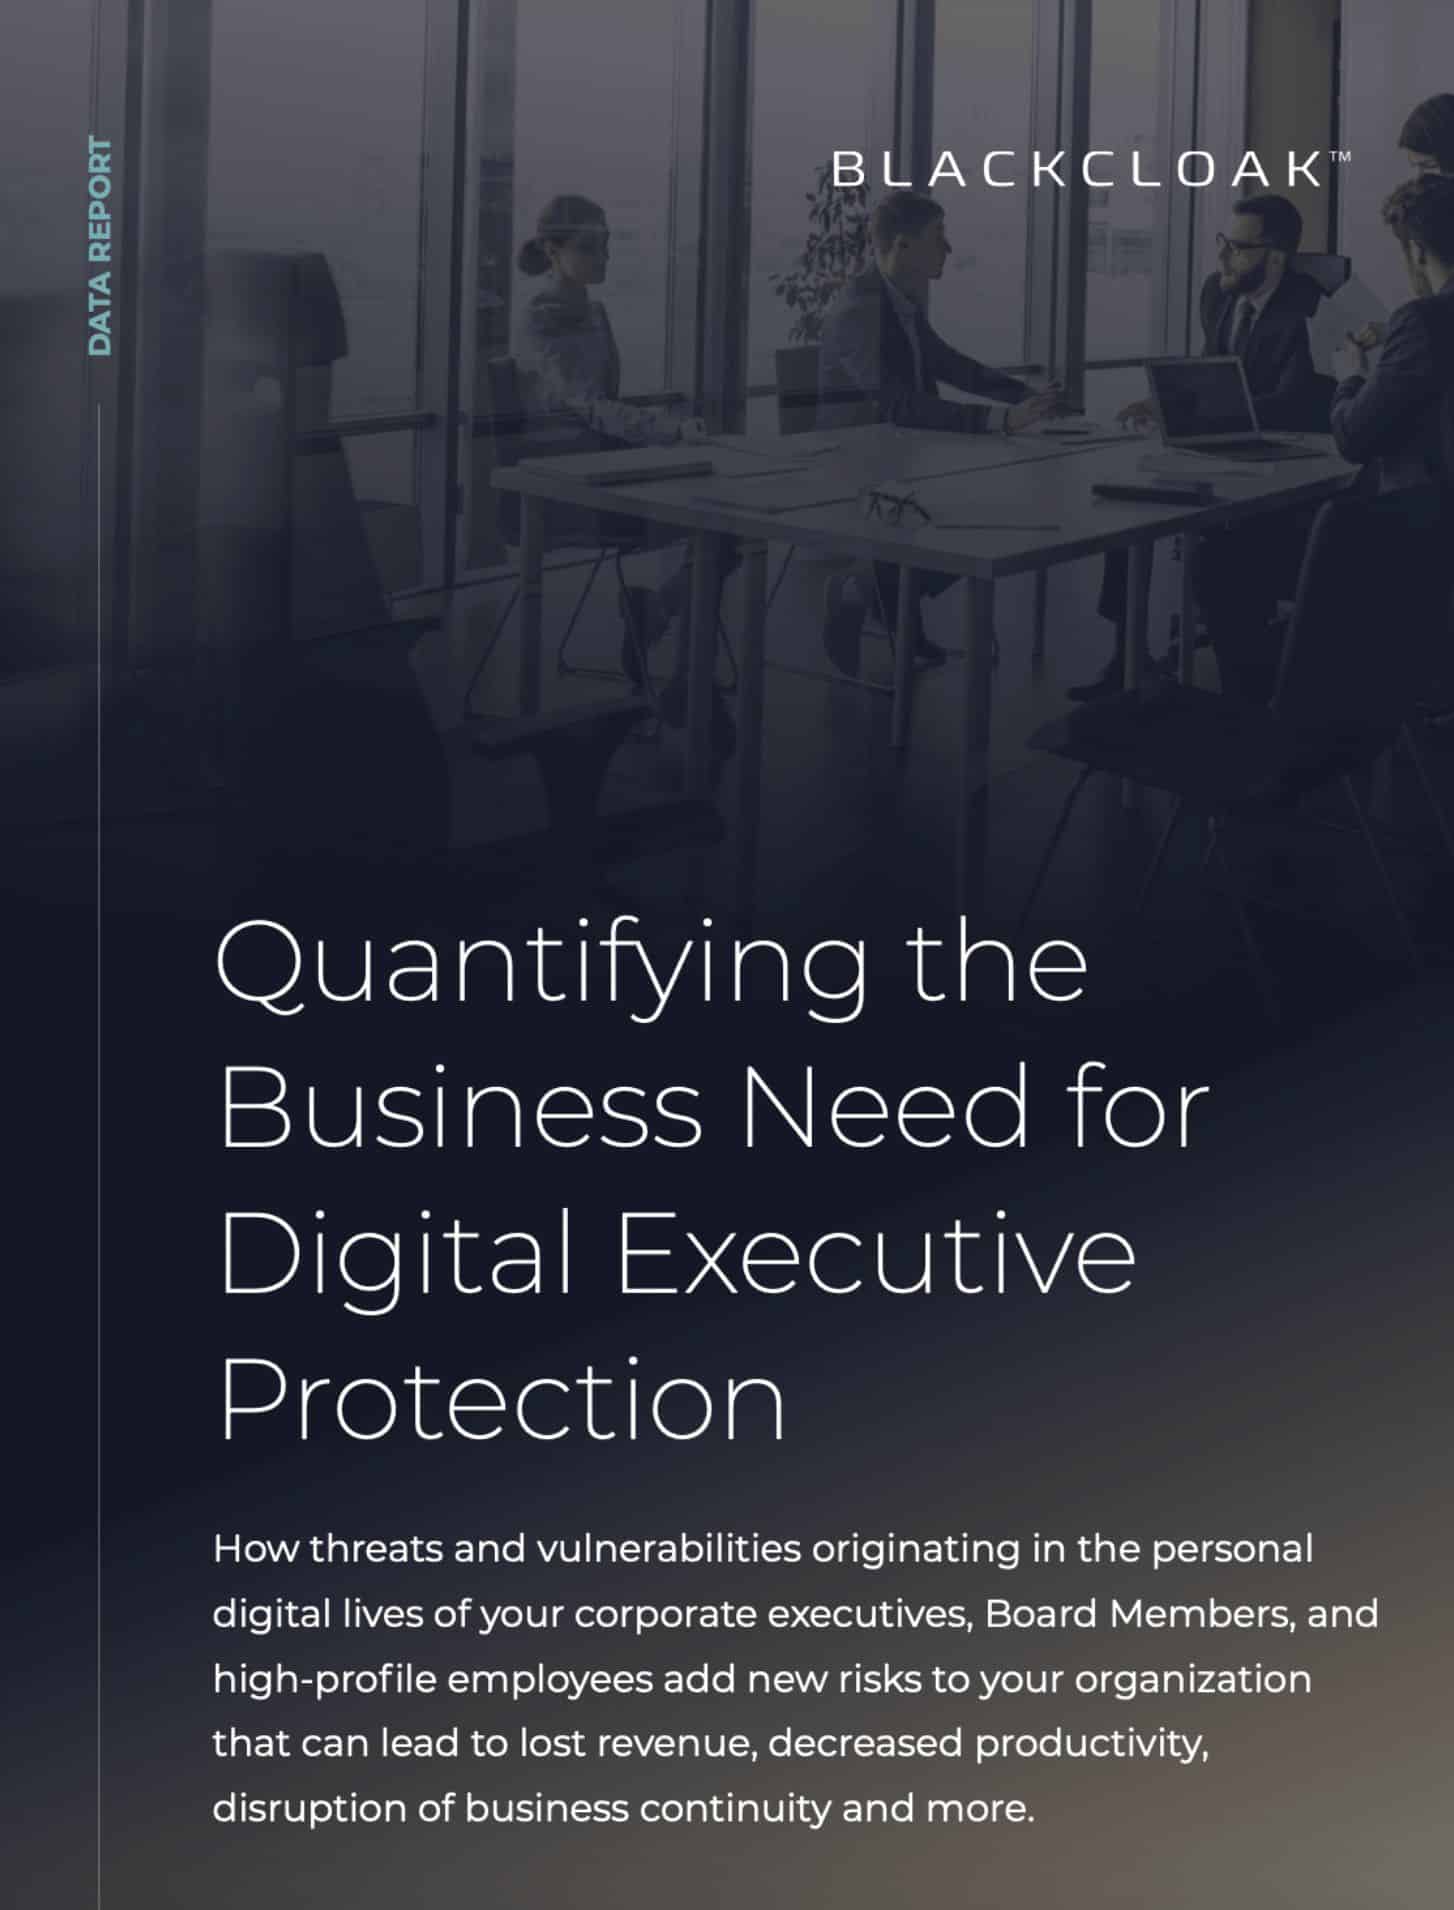 Data report with text, “Quantifying the Business Need for Digital Executive Protection”